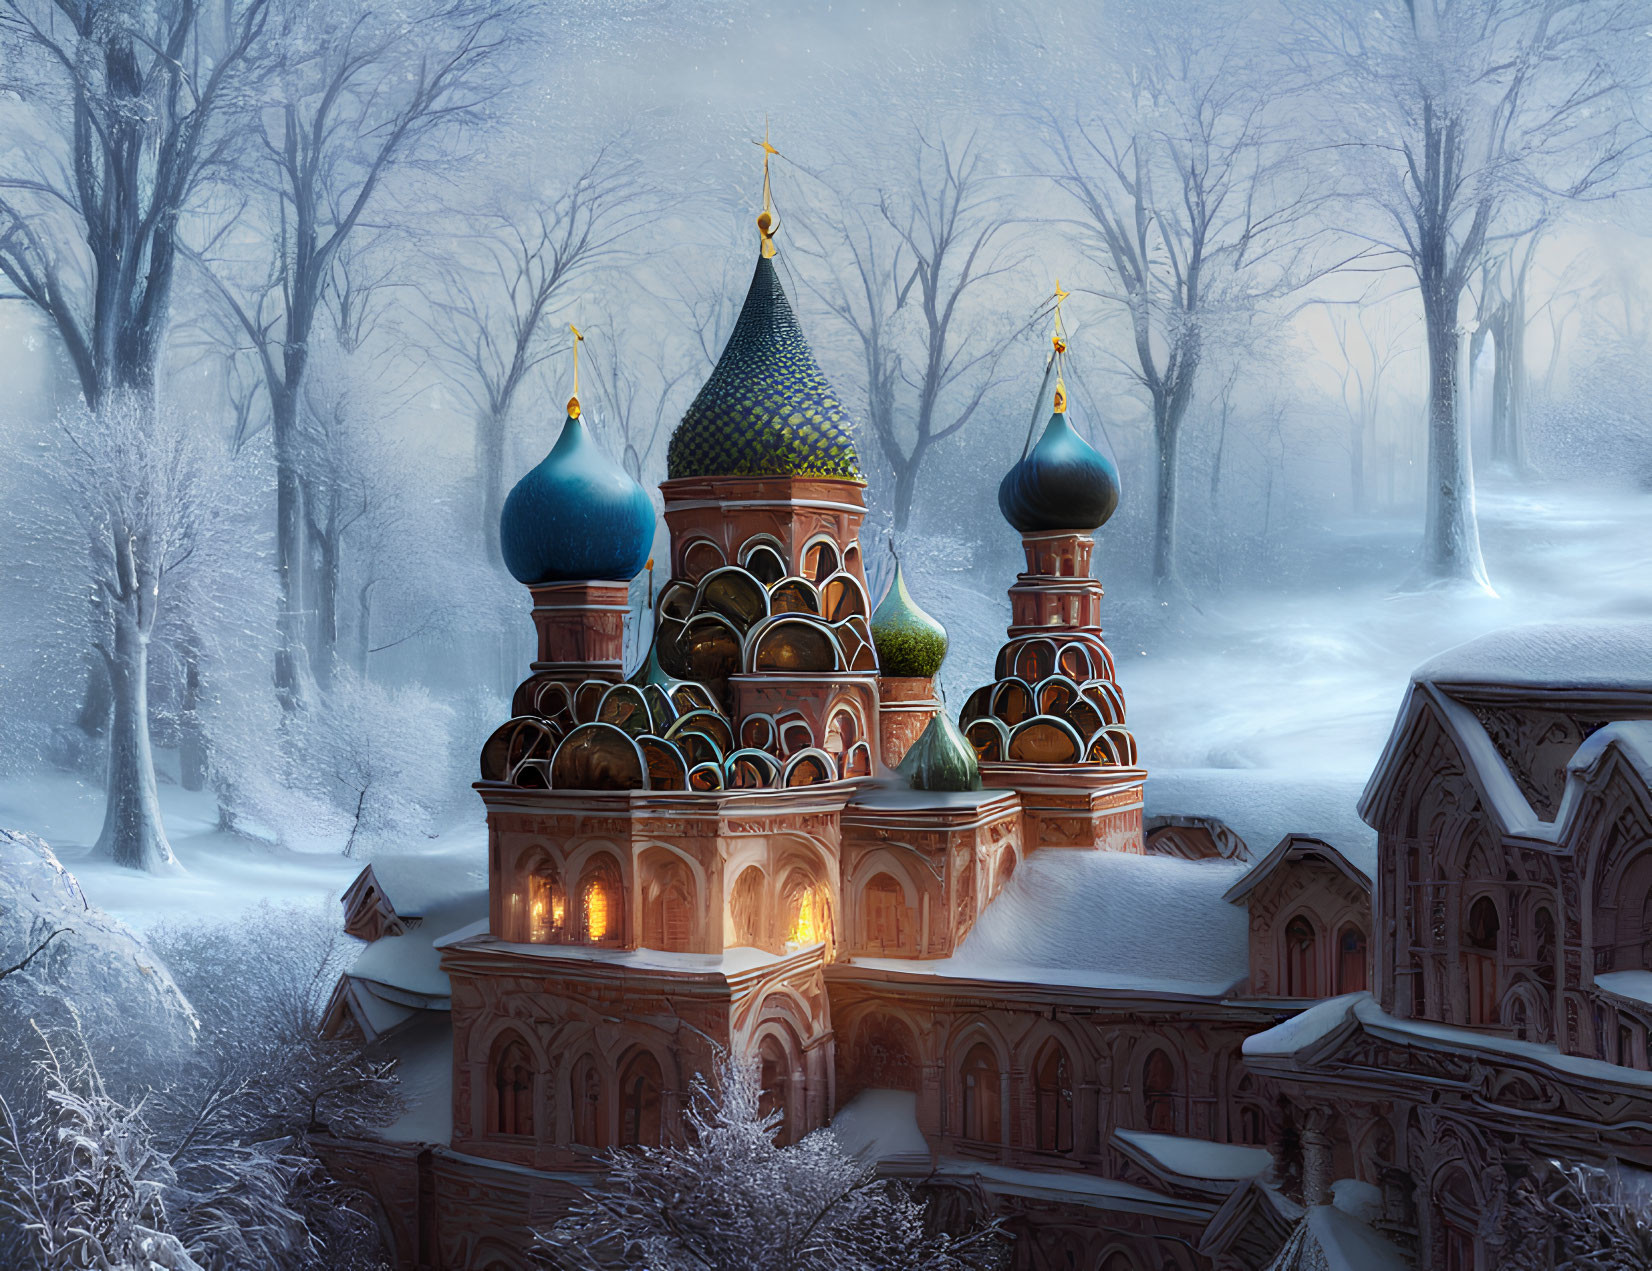 Colorful Onion Domes in Snowy Forest Setting